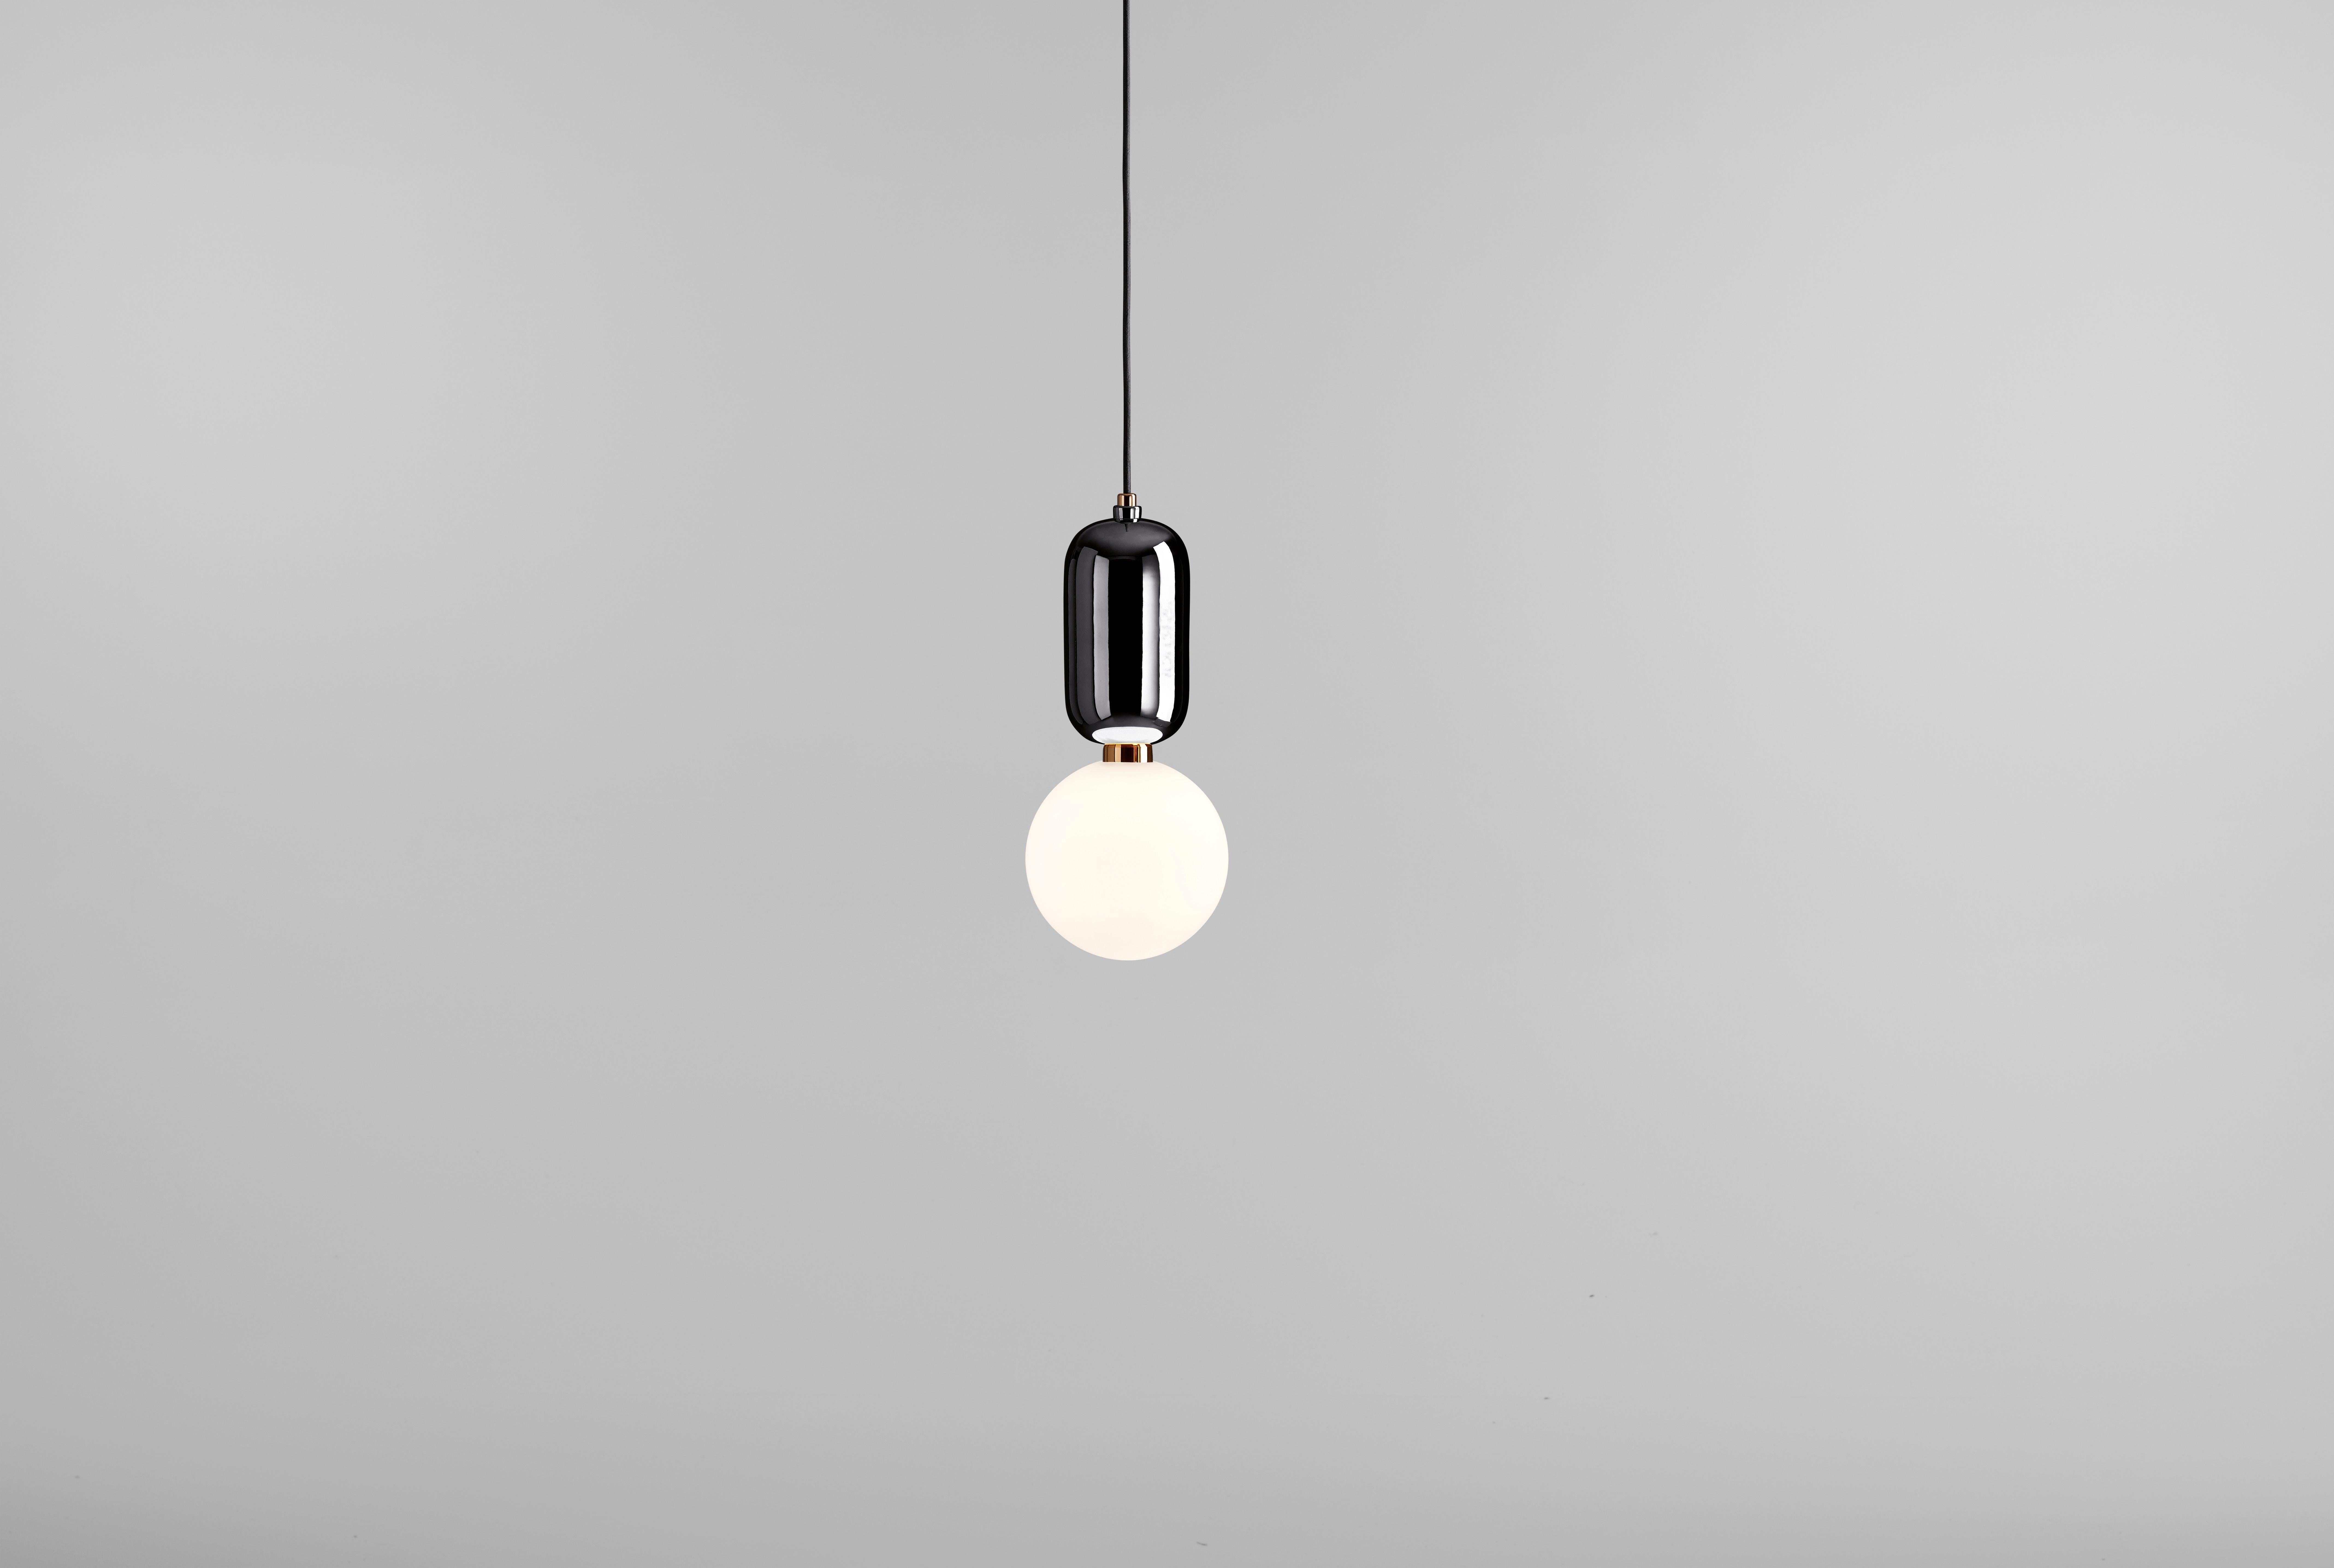 Suspension lamp, model Aballs T PE, designed by Jaime Hayon in 2013.
Manufactured by Parachilna.
Handmade ceramic body and blown opal matt glass diffuser. 
Base is also available in white, black, golden, copper or platinum ceramic. 


Shiny and